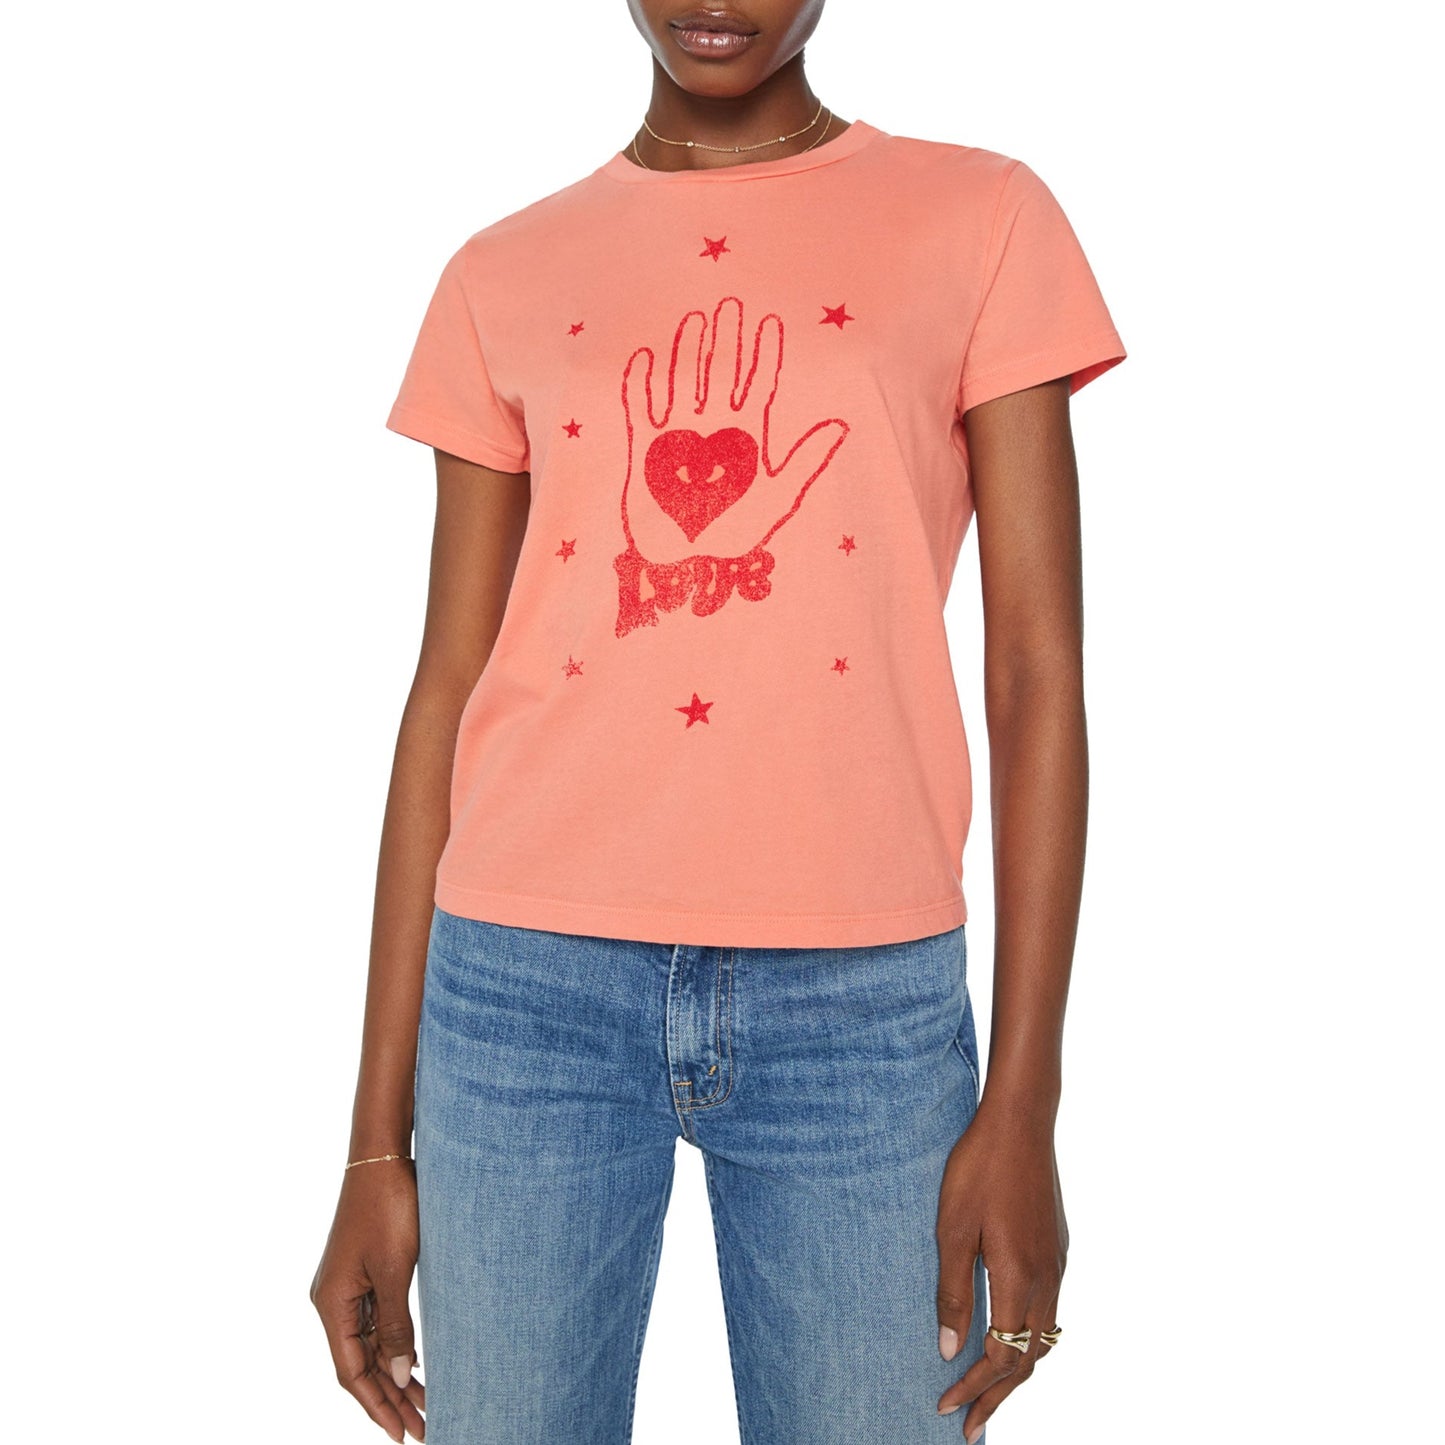 Itty Bitty Goodie Tee in Seeing Love